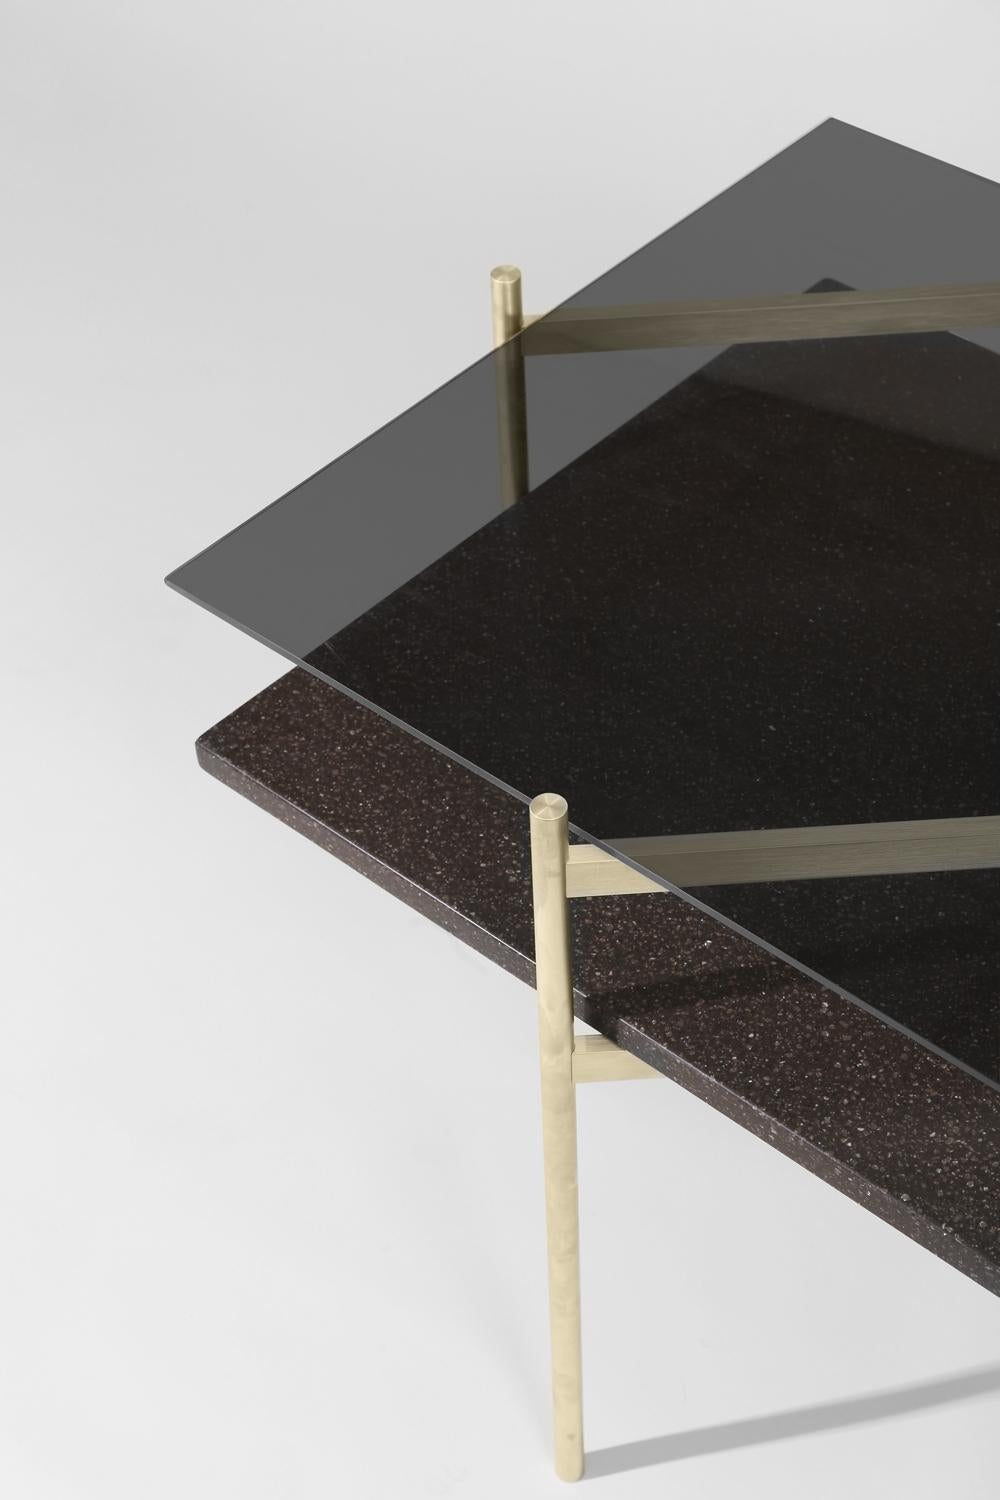 Made to order. Please allow six weeks for production.

Brass frame / Smoked glass / Black mosaic

The Duotone Furniture series is based on a modular hardware system that pairs sturdy construction with visual lightness and a range of potential